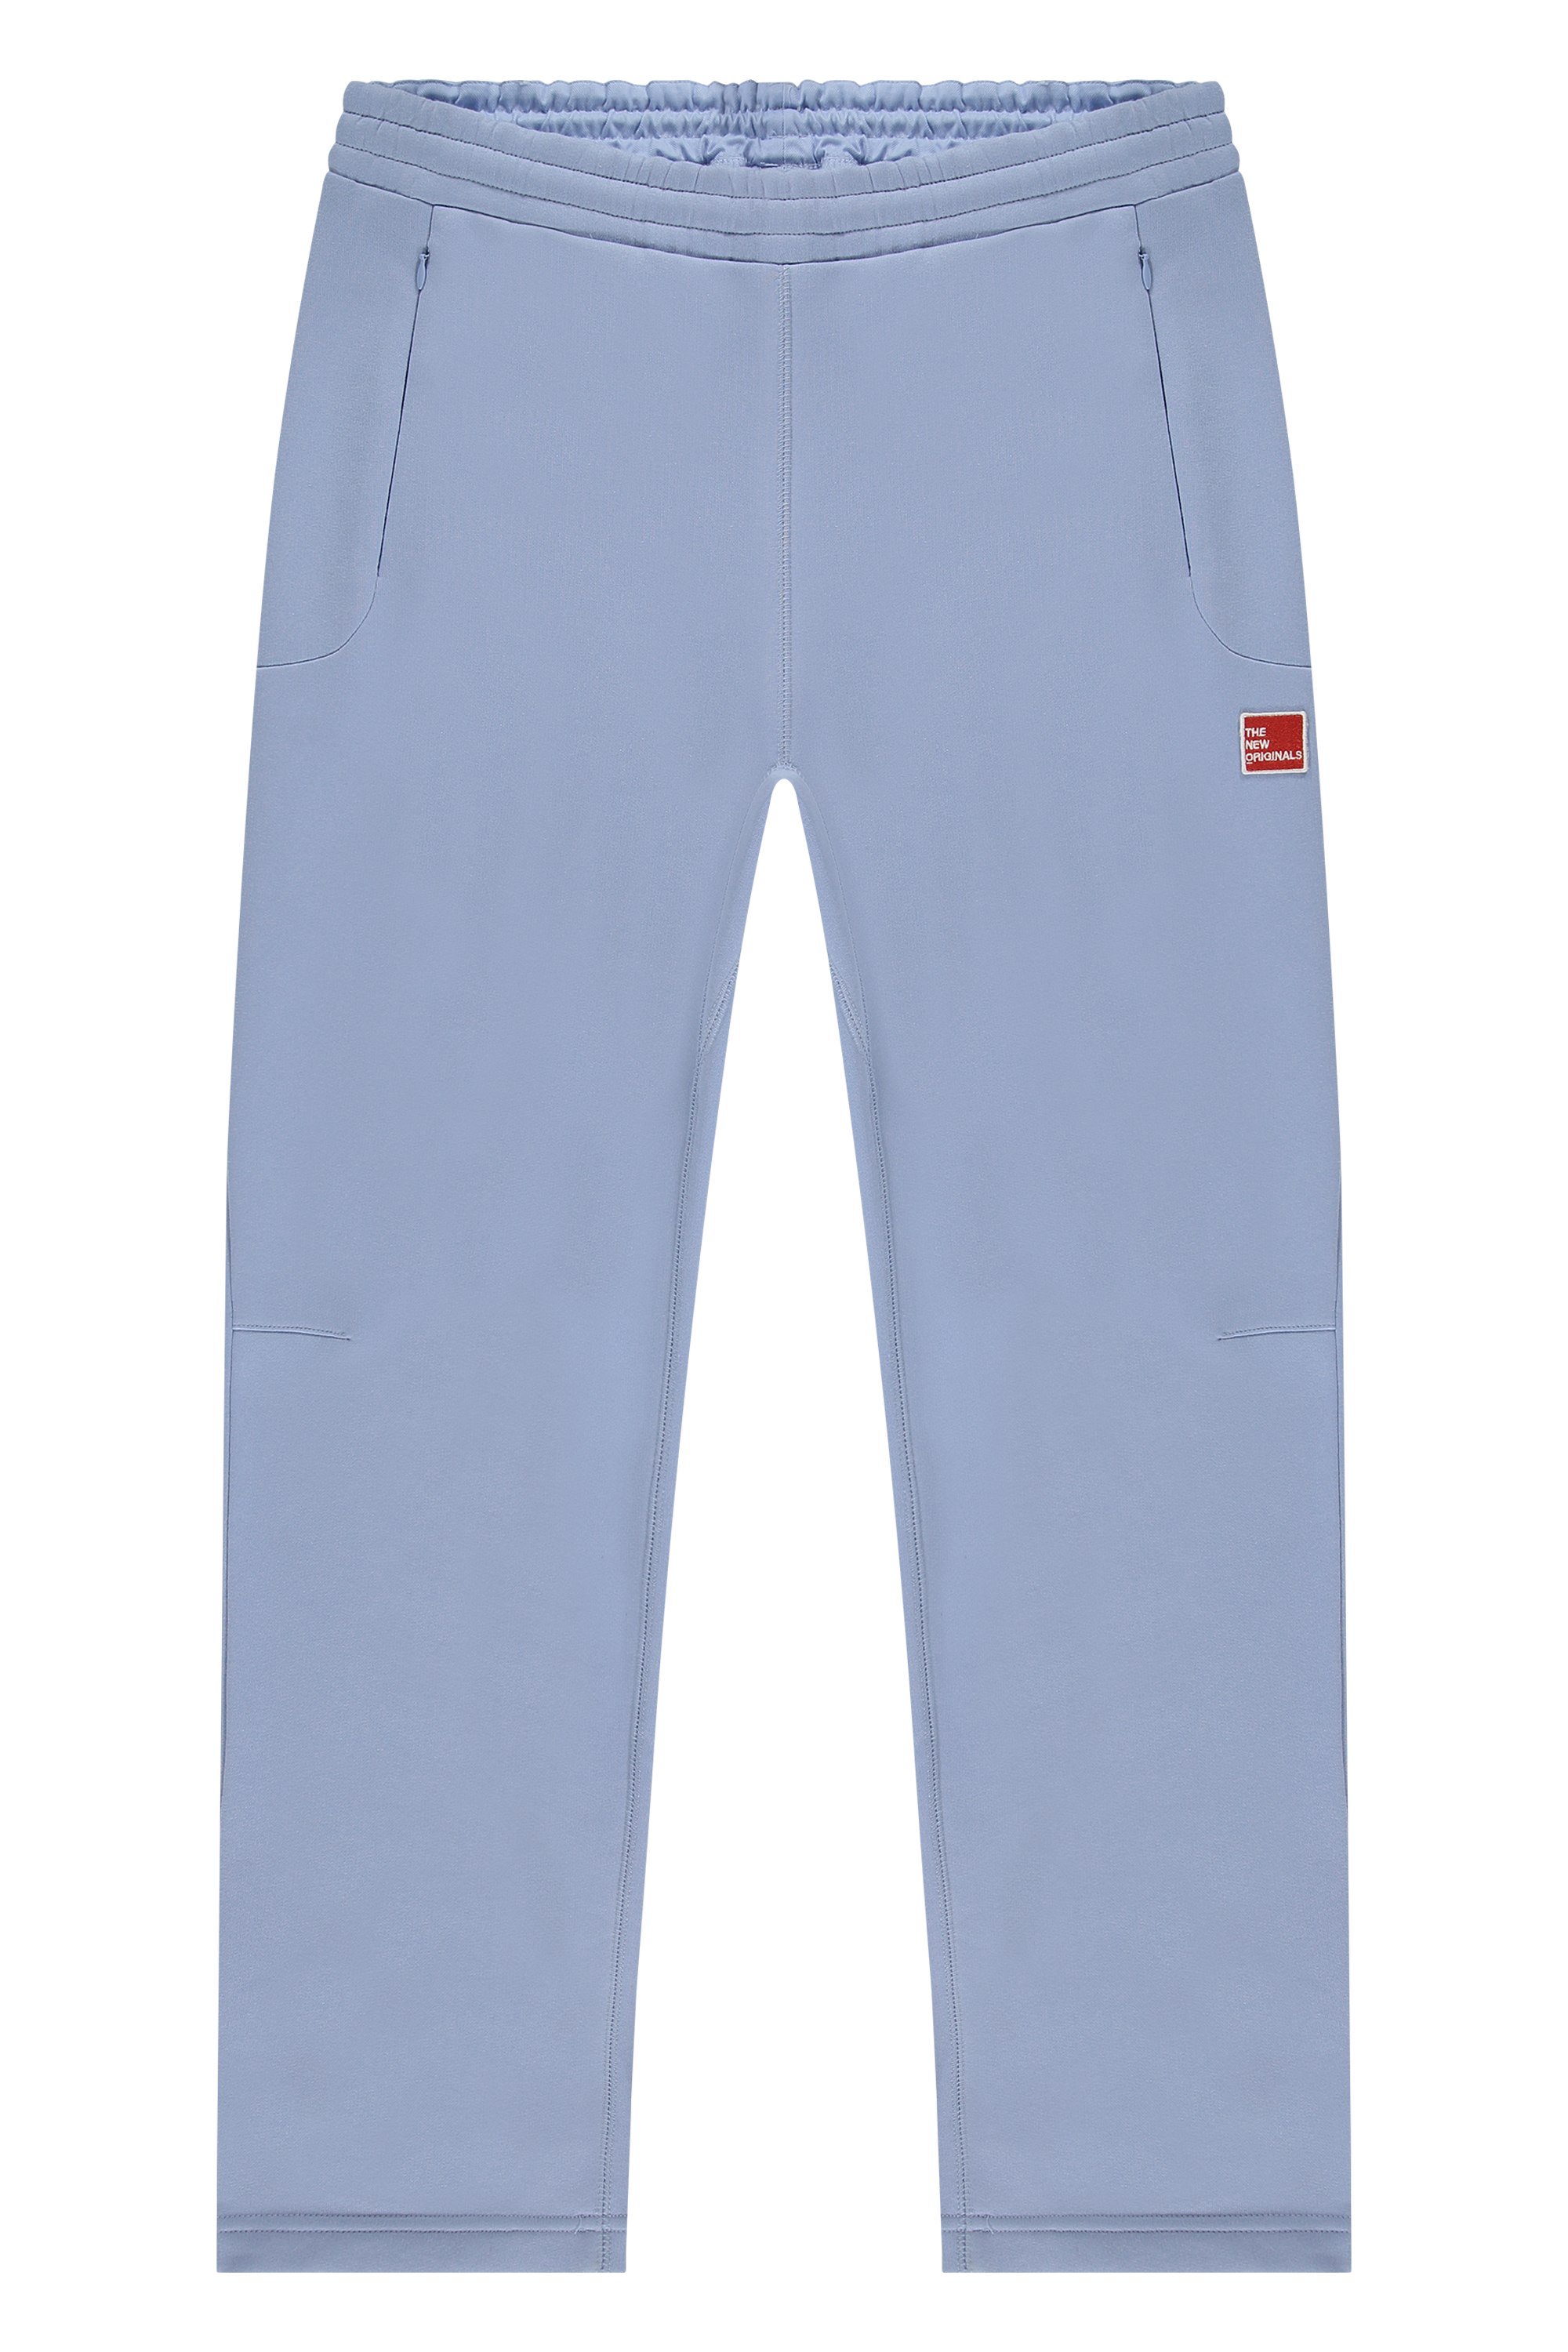 products-cloud9joggers_blueheron_front-png